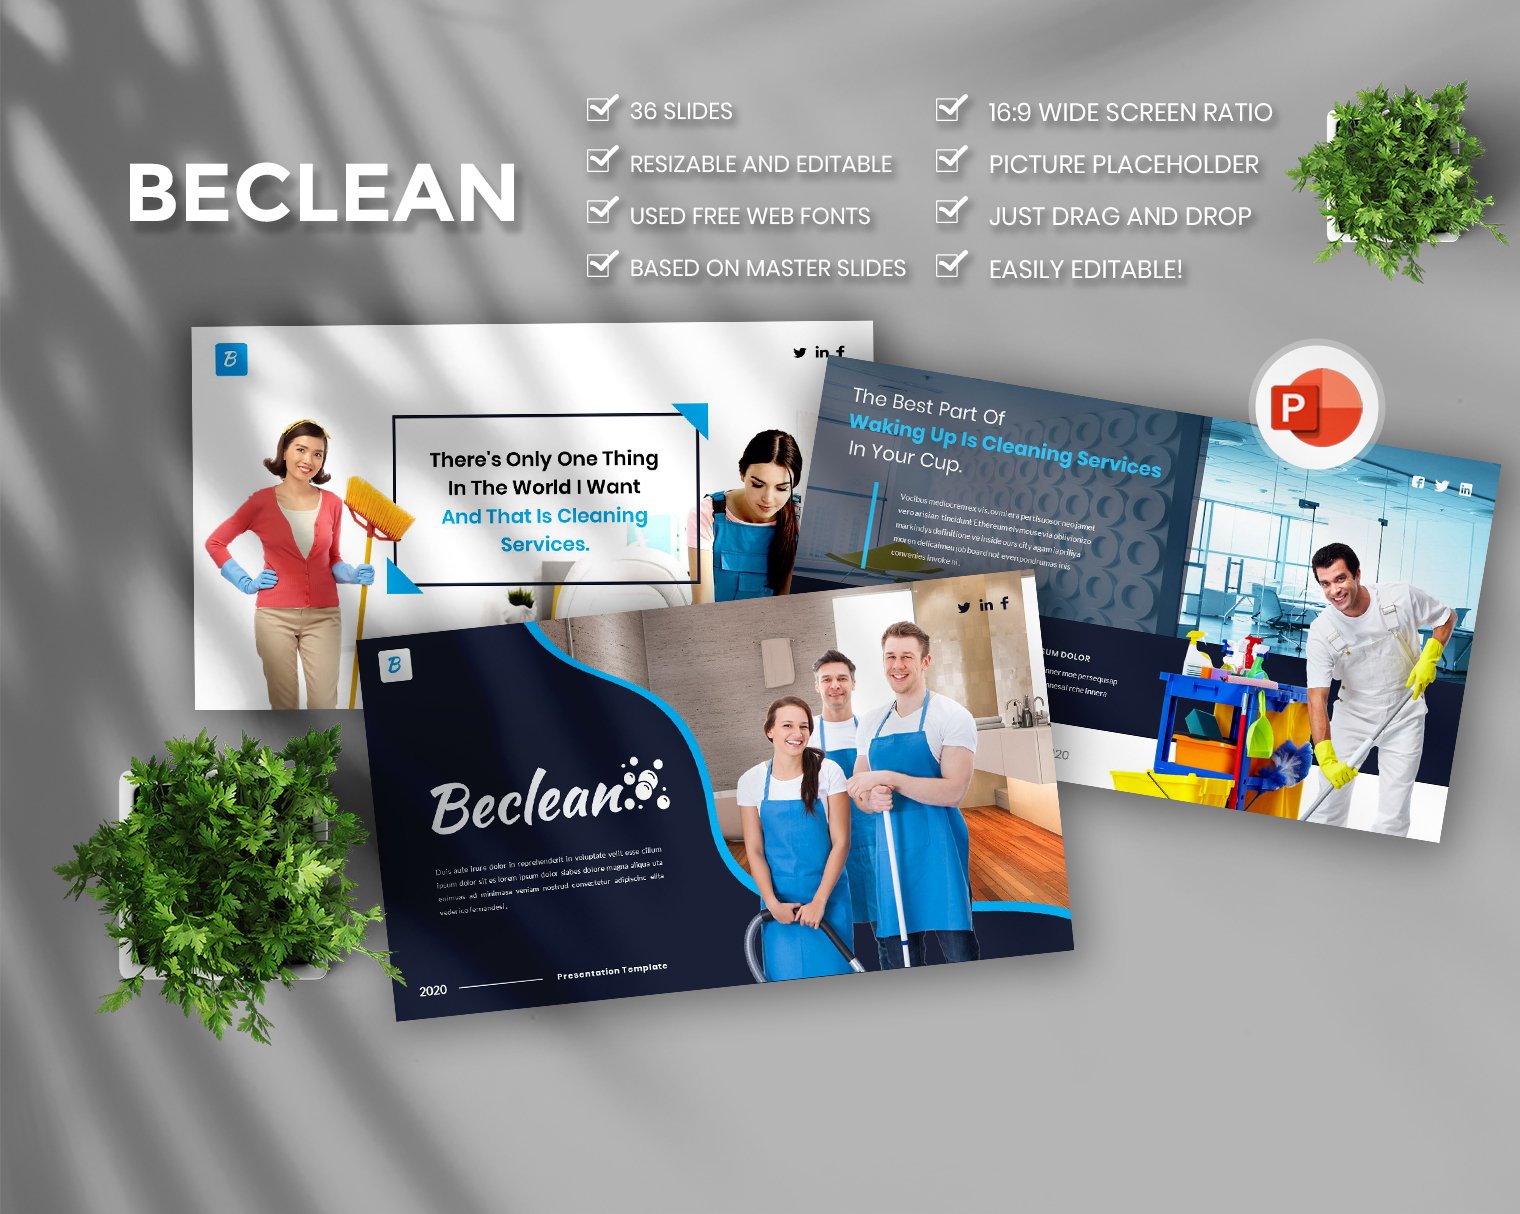 Beclean  CleaningServices PowerPoint cover image.